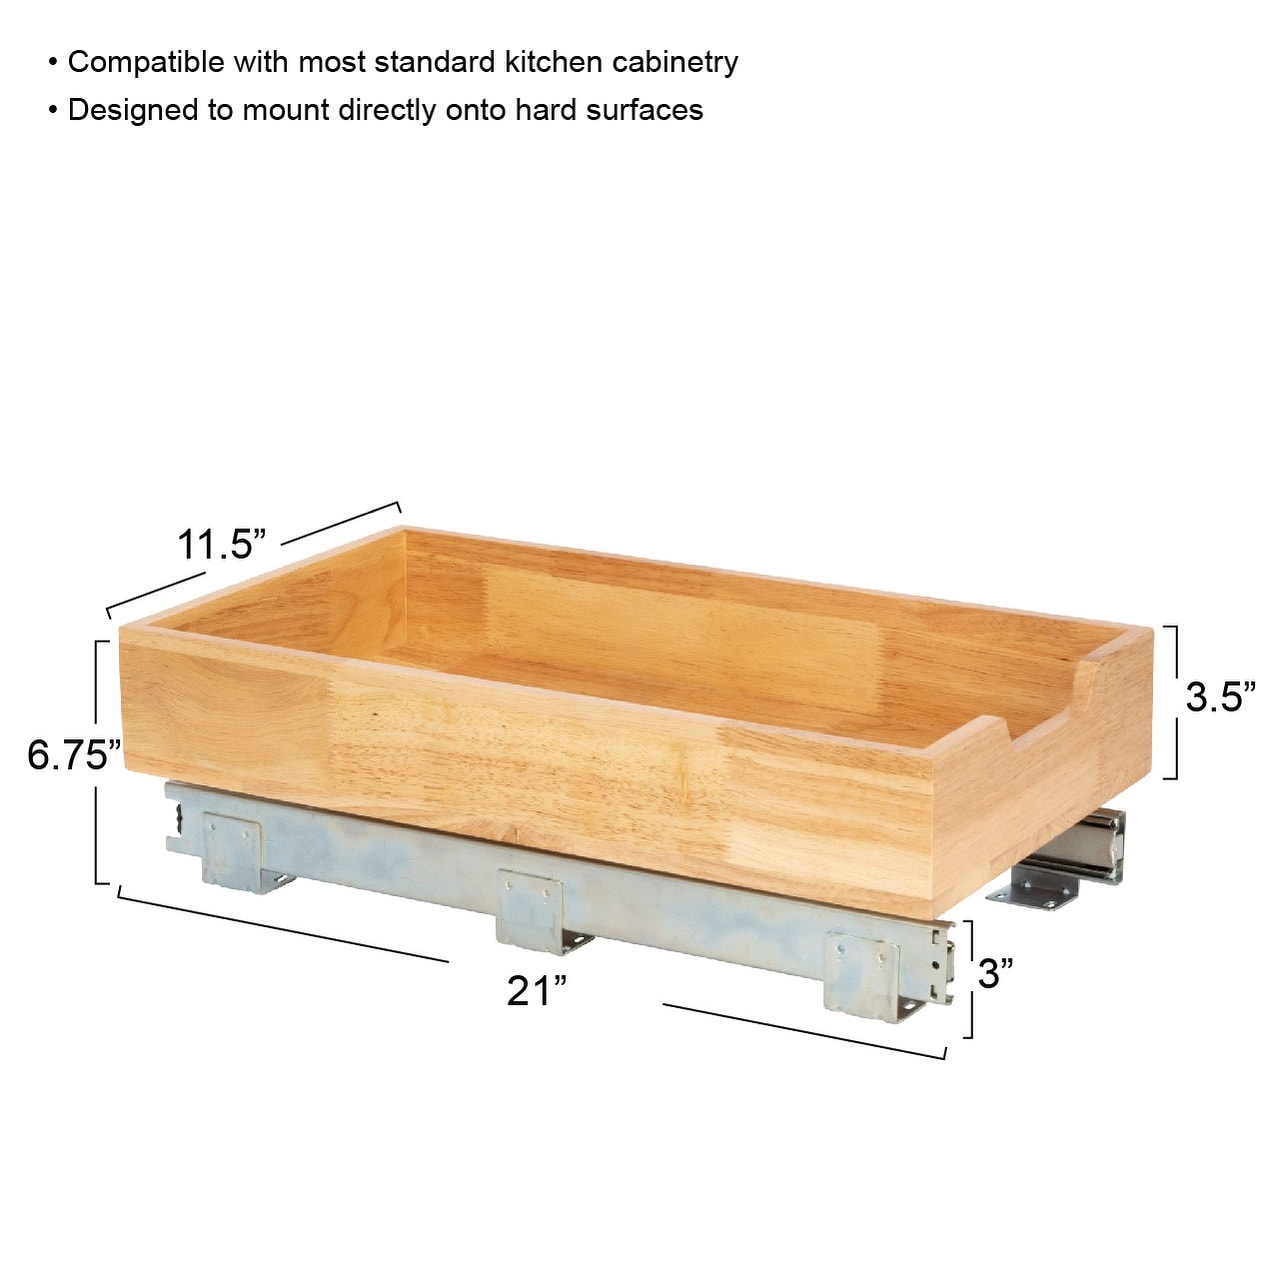 https://ak1.ostkcdn.com/images/products/is/images/direct/a2195b470838d5ff7f164192f7443ff38c4e956e/Household-Essentials-Glidez-Wood-1-Tier-Sliding-Cabinet-Organizer.jpg